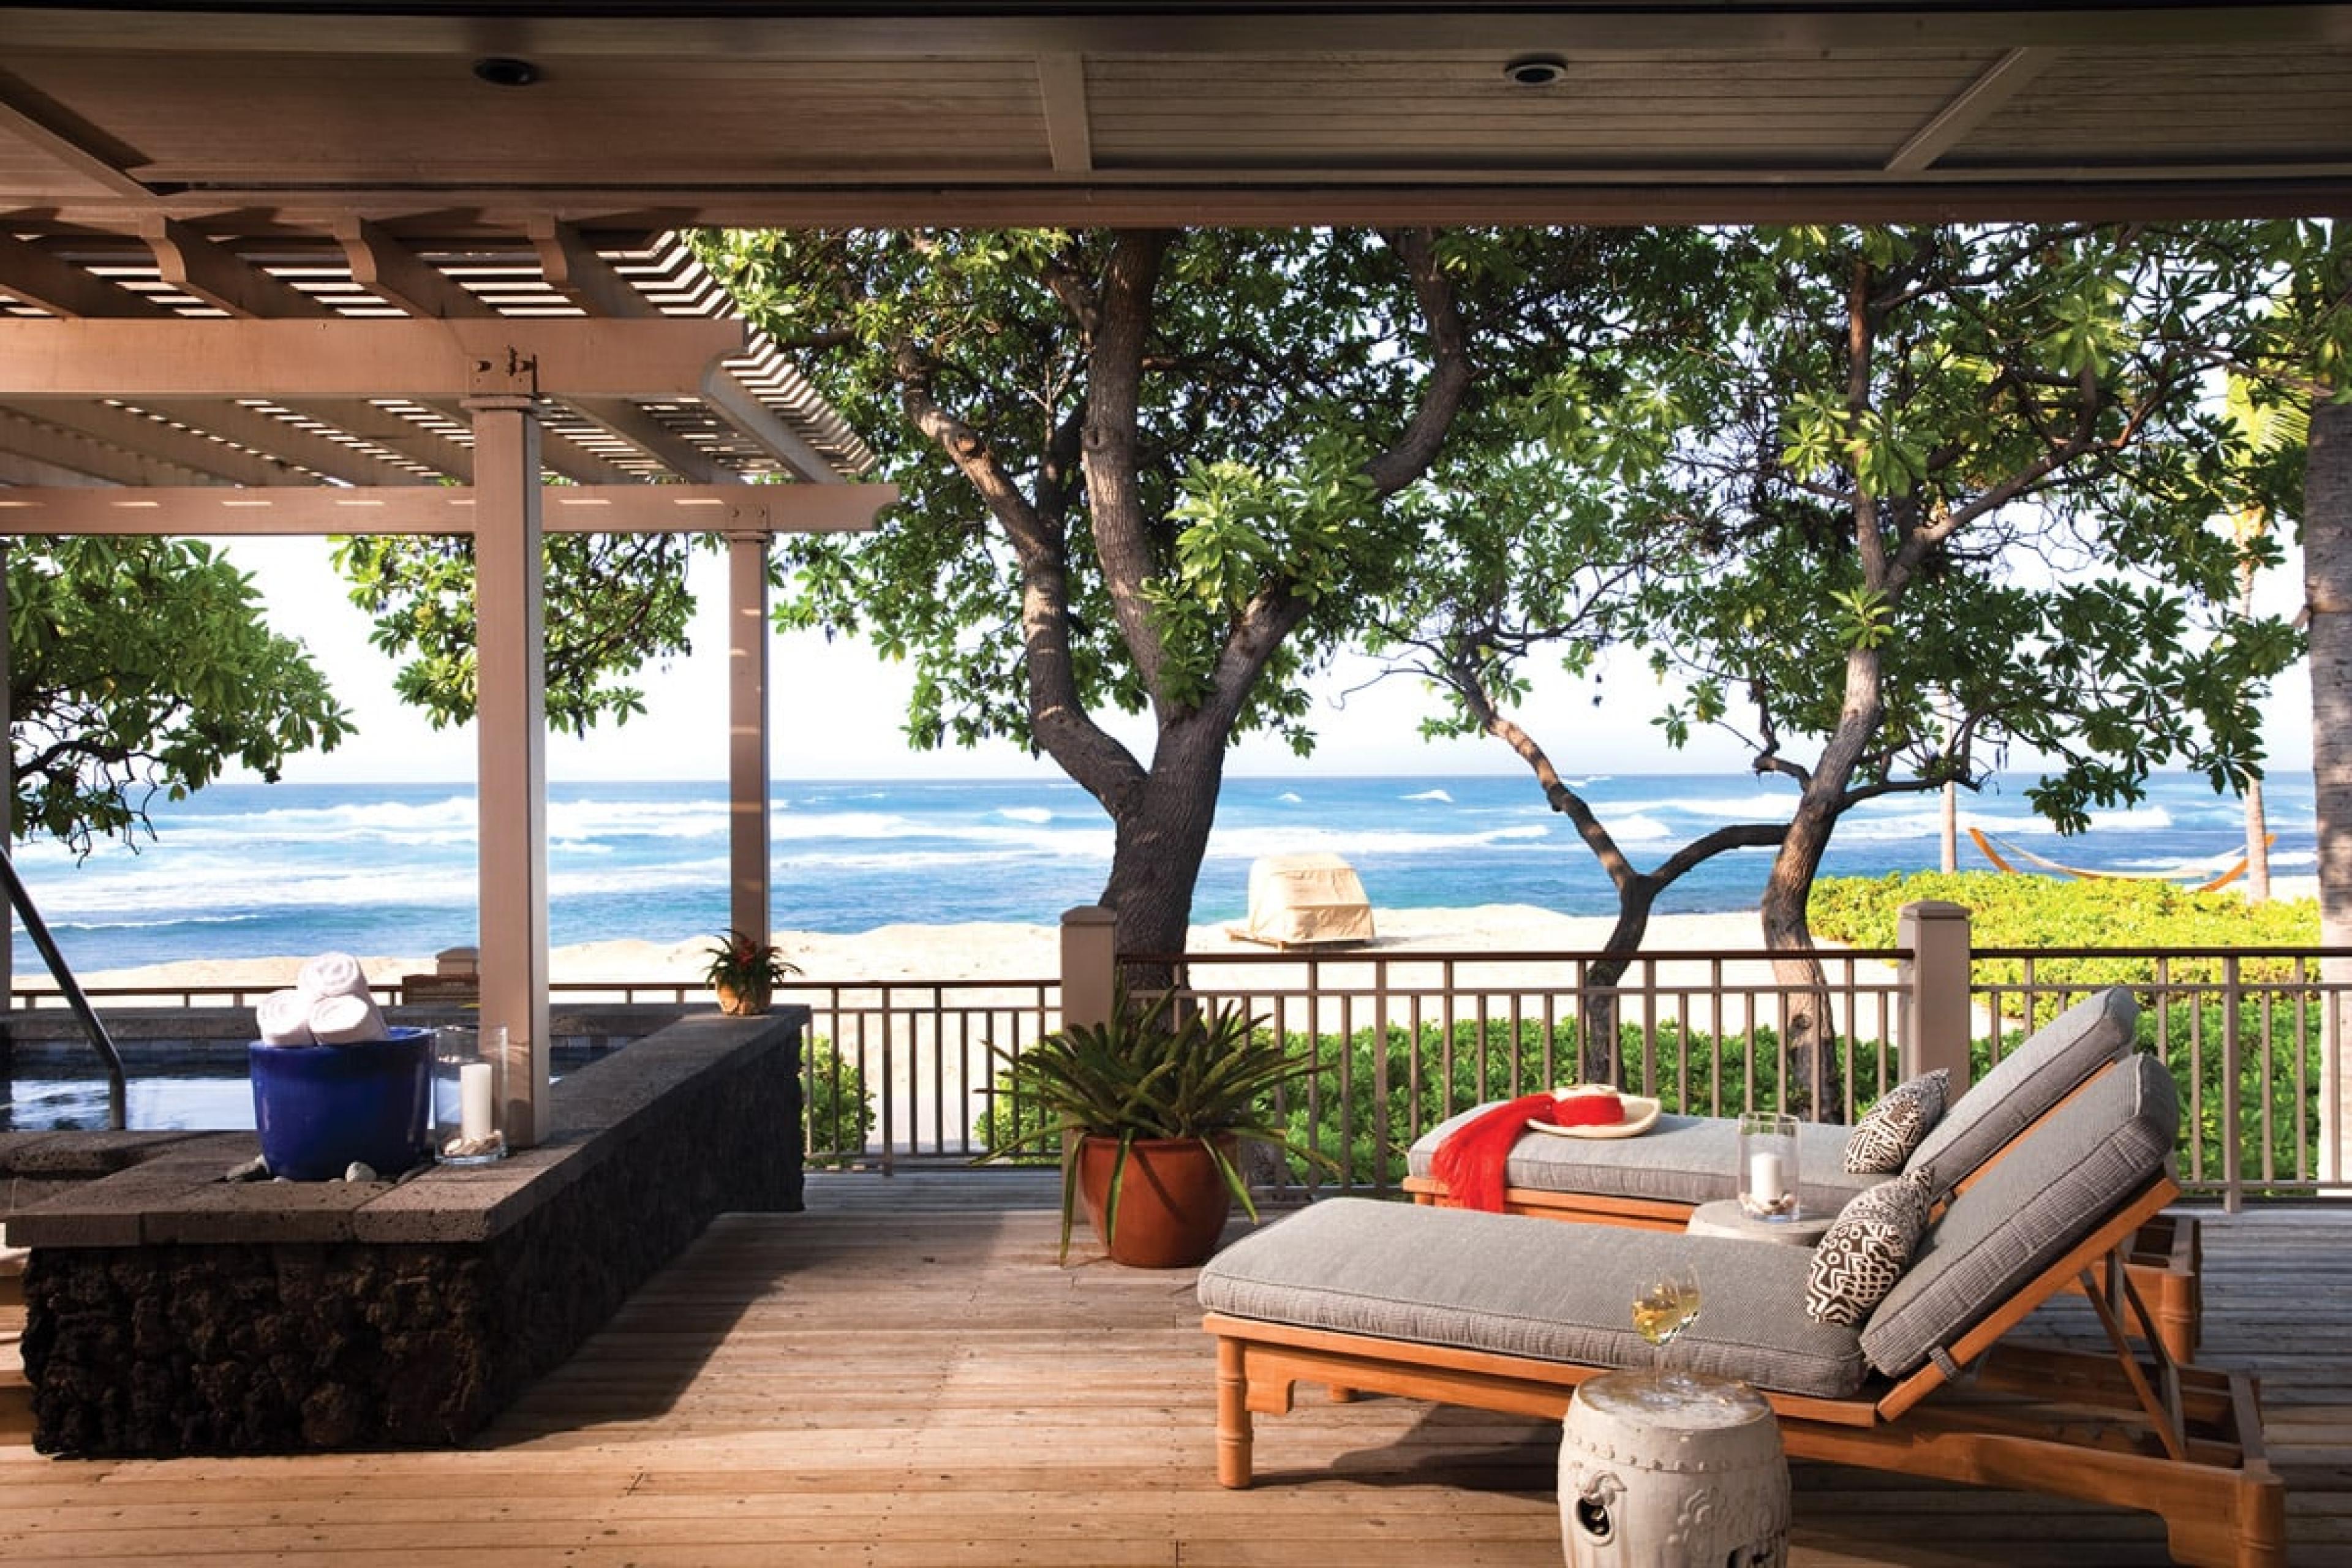 covered terrace in hawaii with two reclining lounge chairs overlooking beach through trees